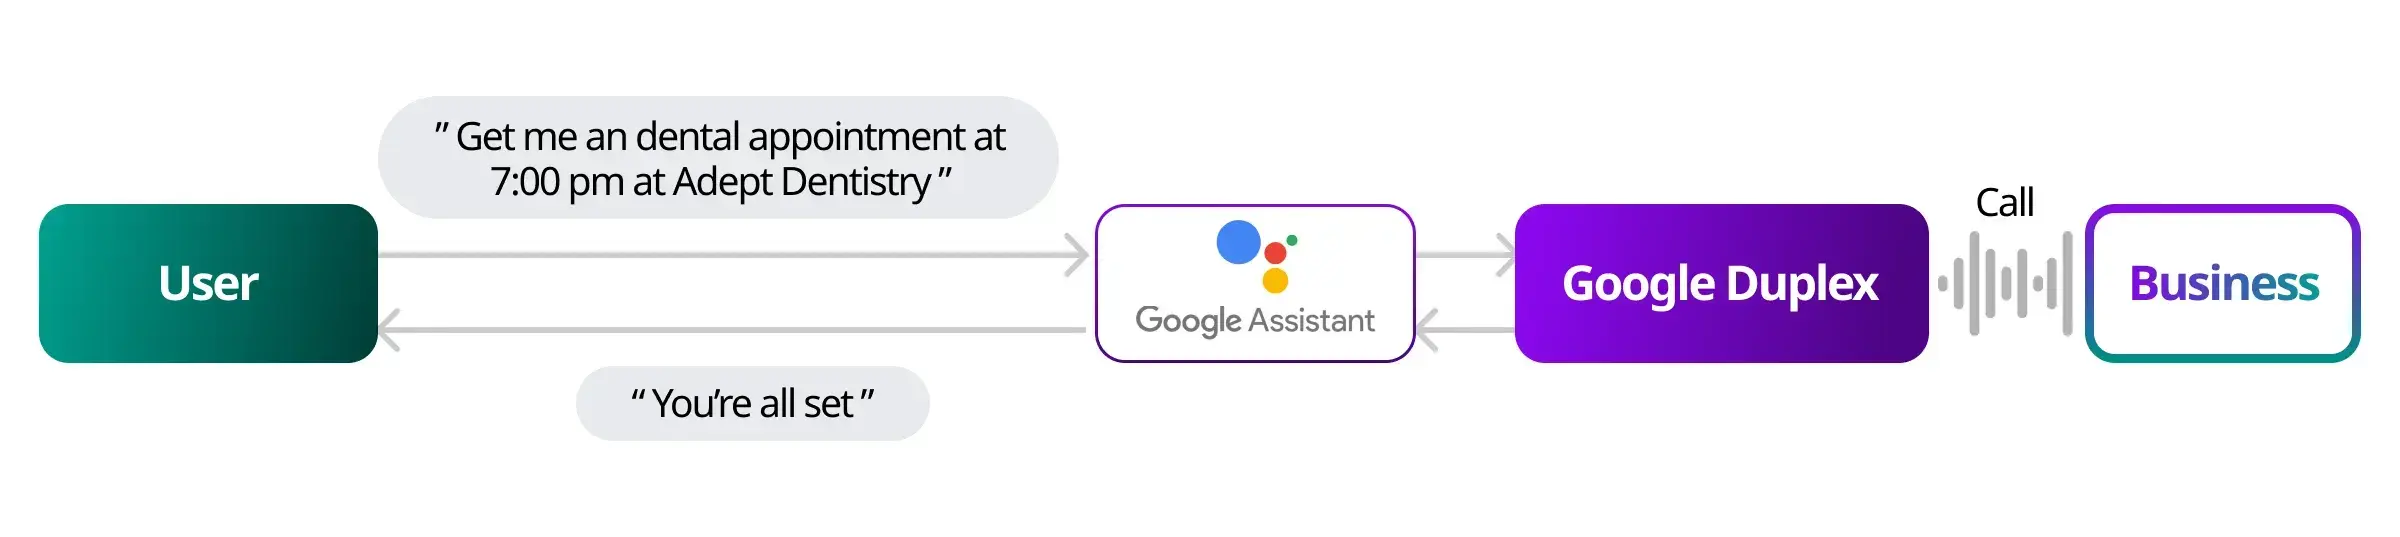 Real-World Example: Google's Duplex - Next-Generation AI Systems